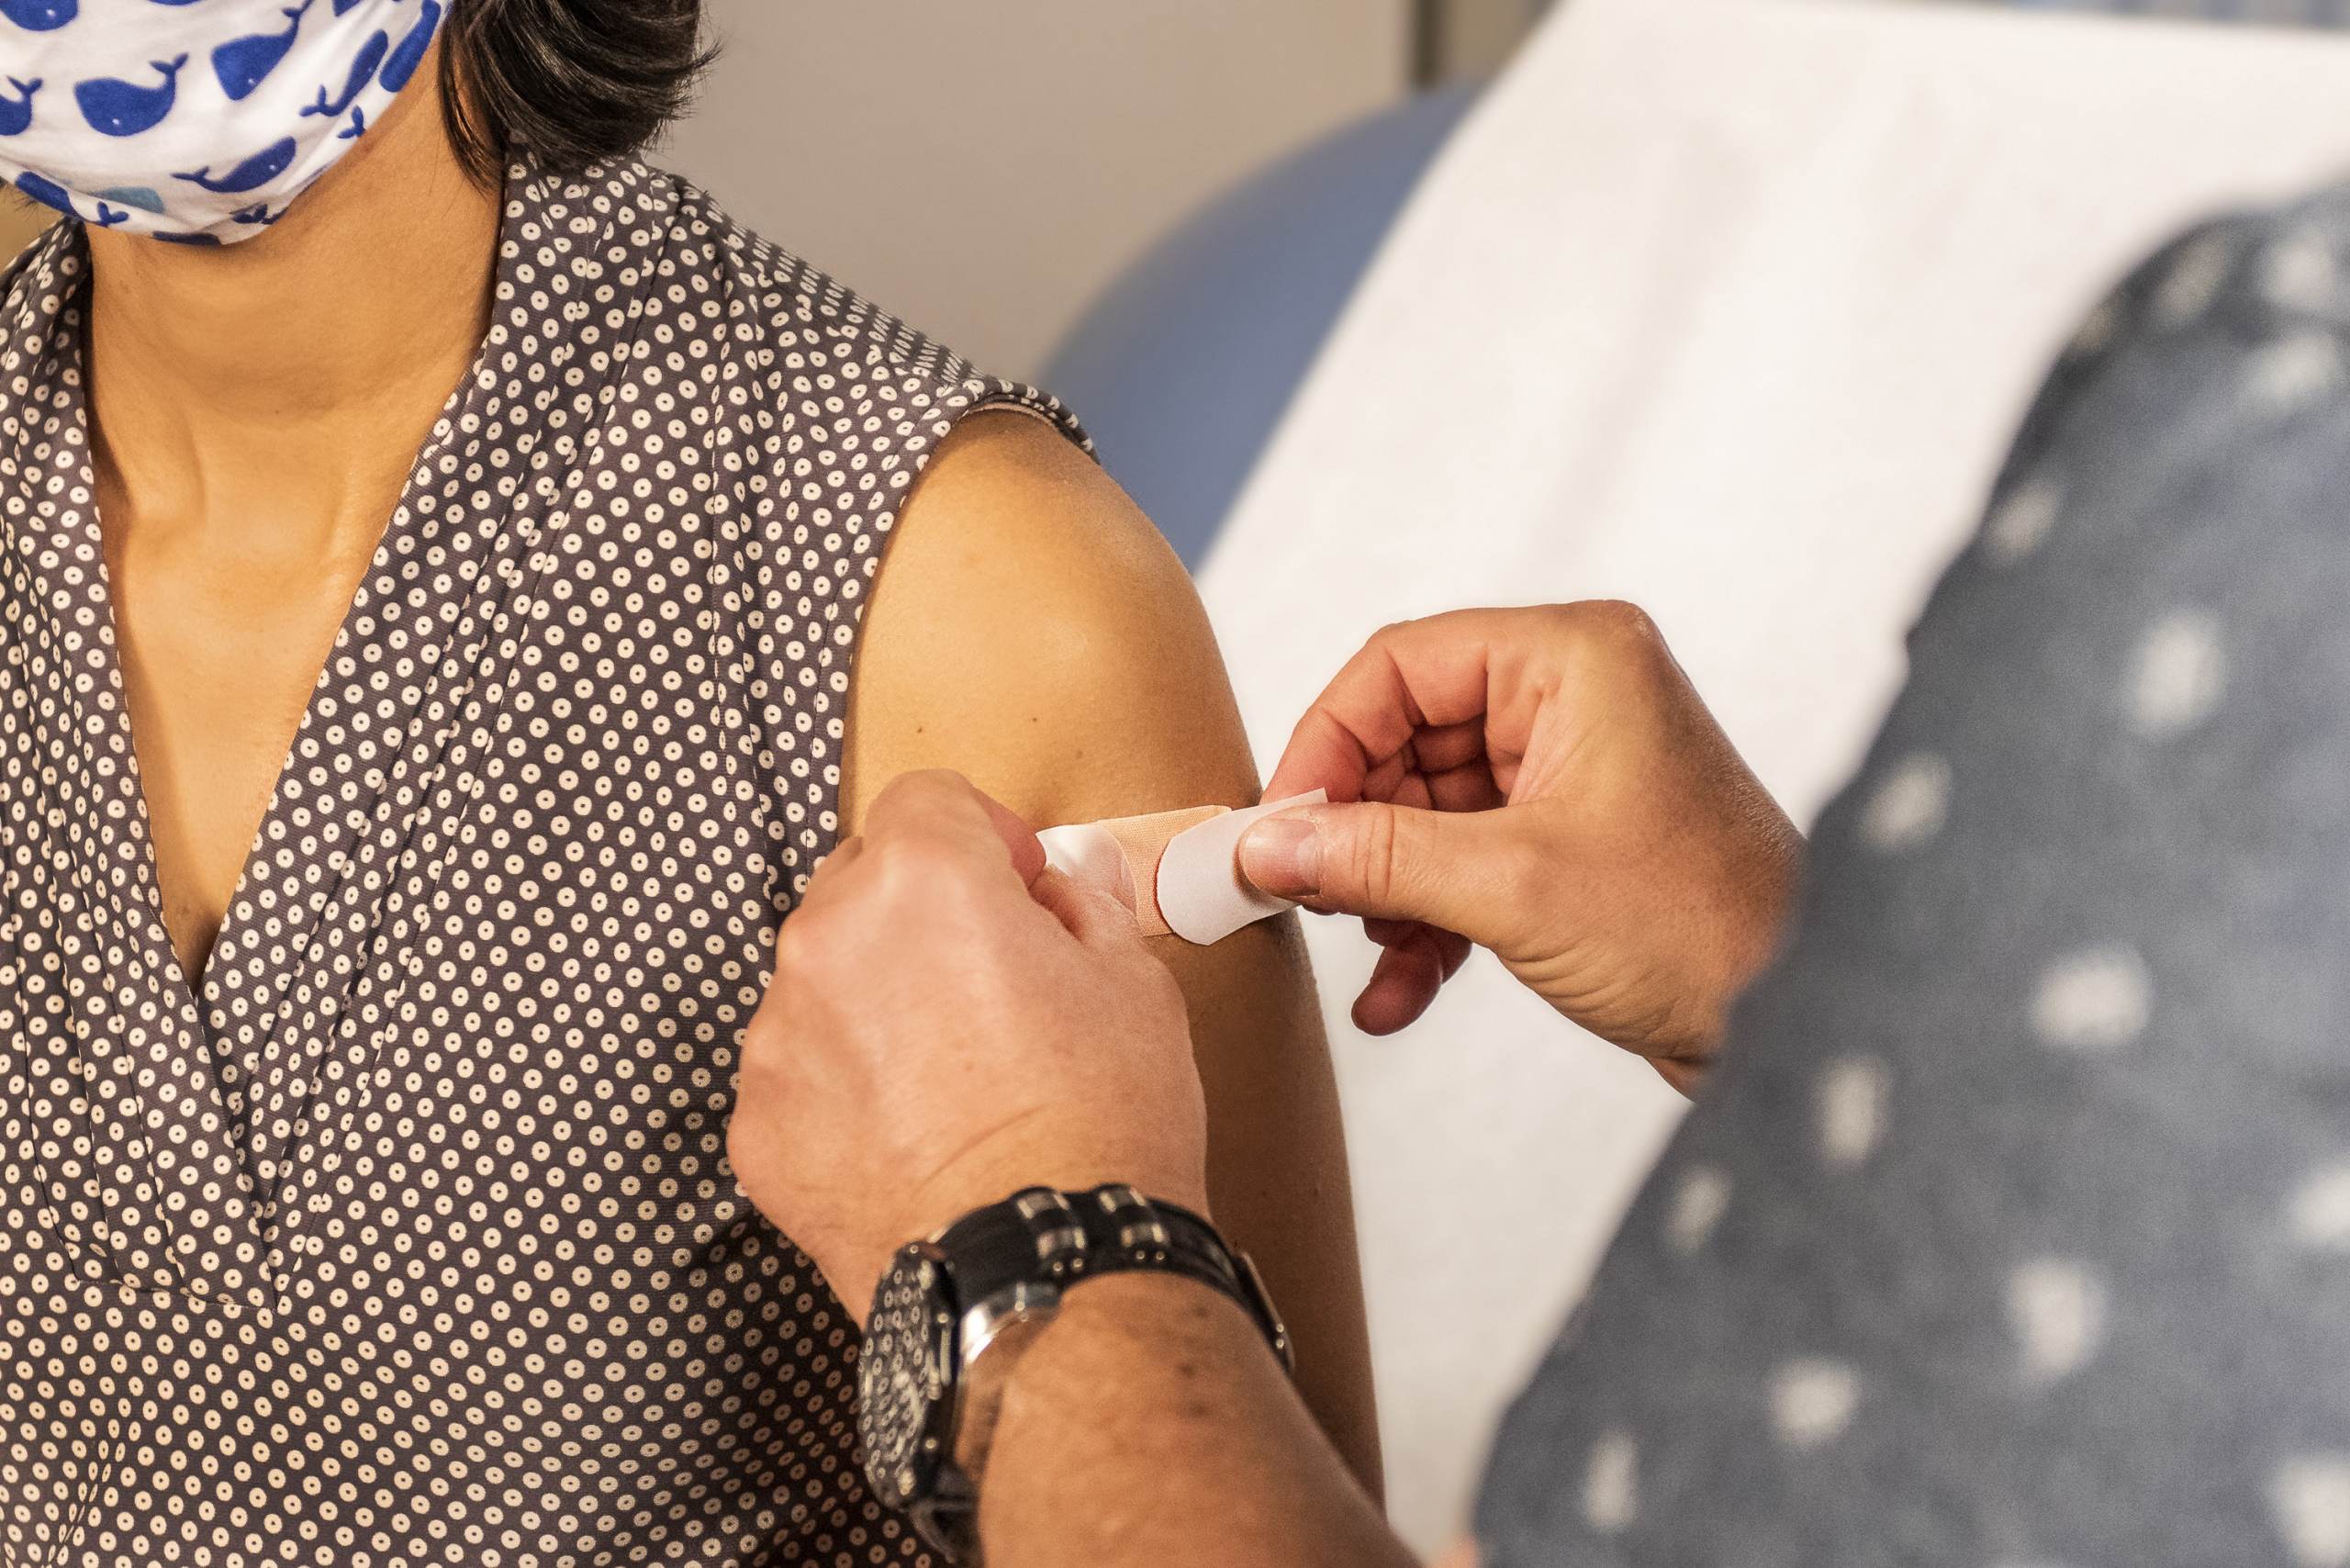 Nearly 4,000 People in Massachusetts Have Tested Positive for Coronavirus After Being Fully Vaccinated